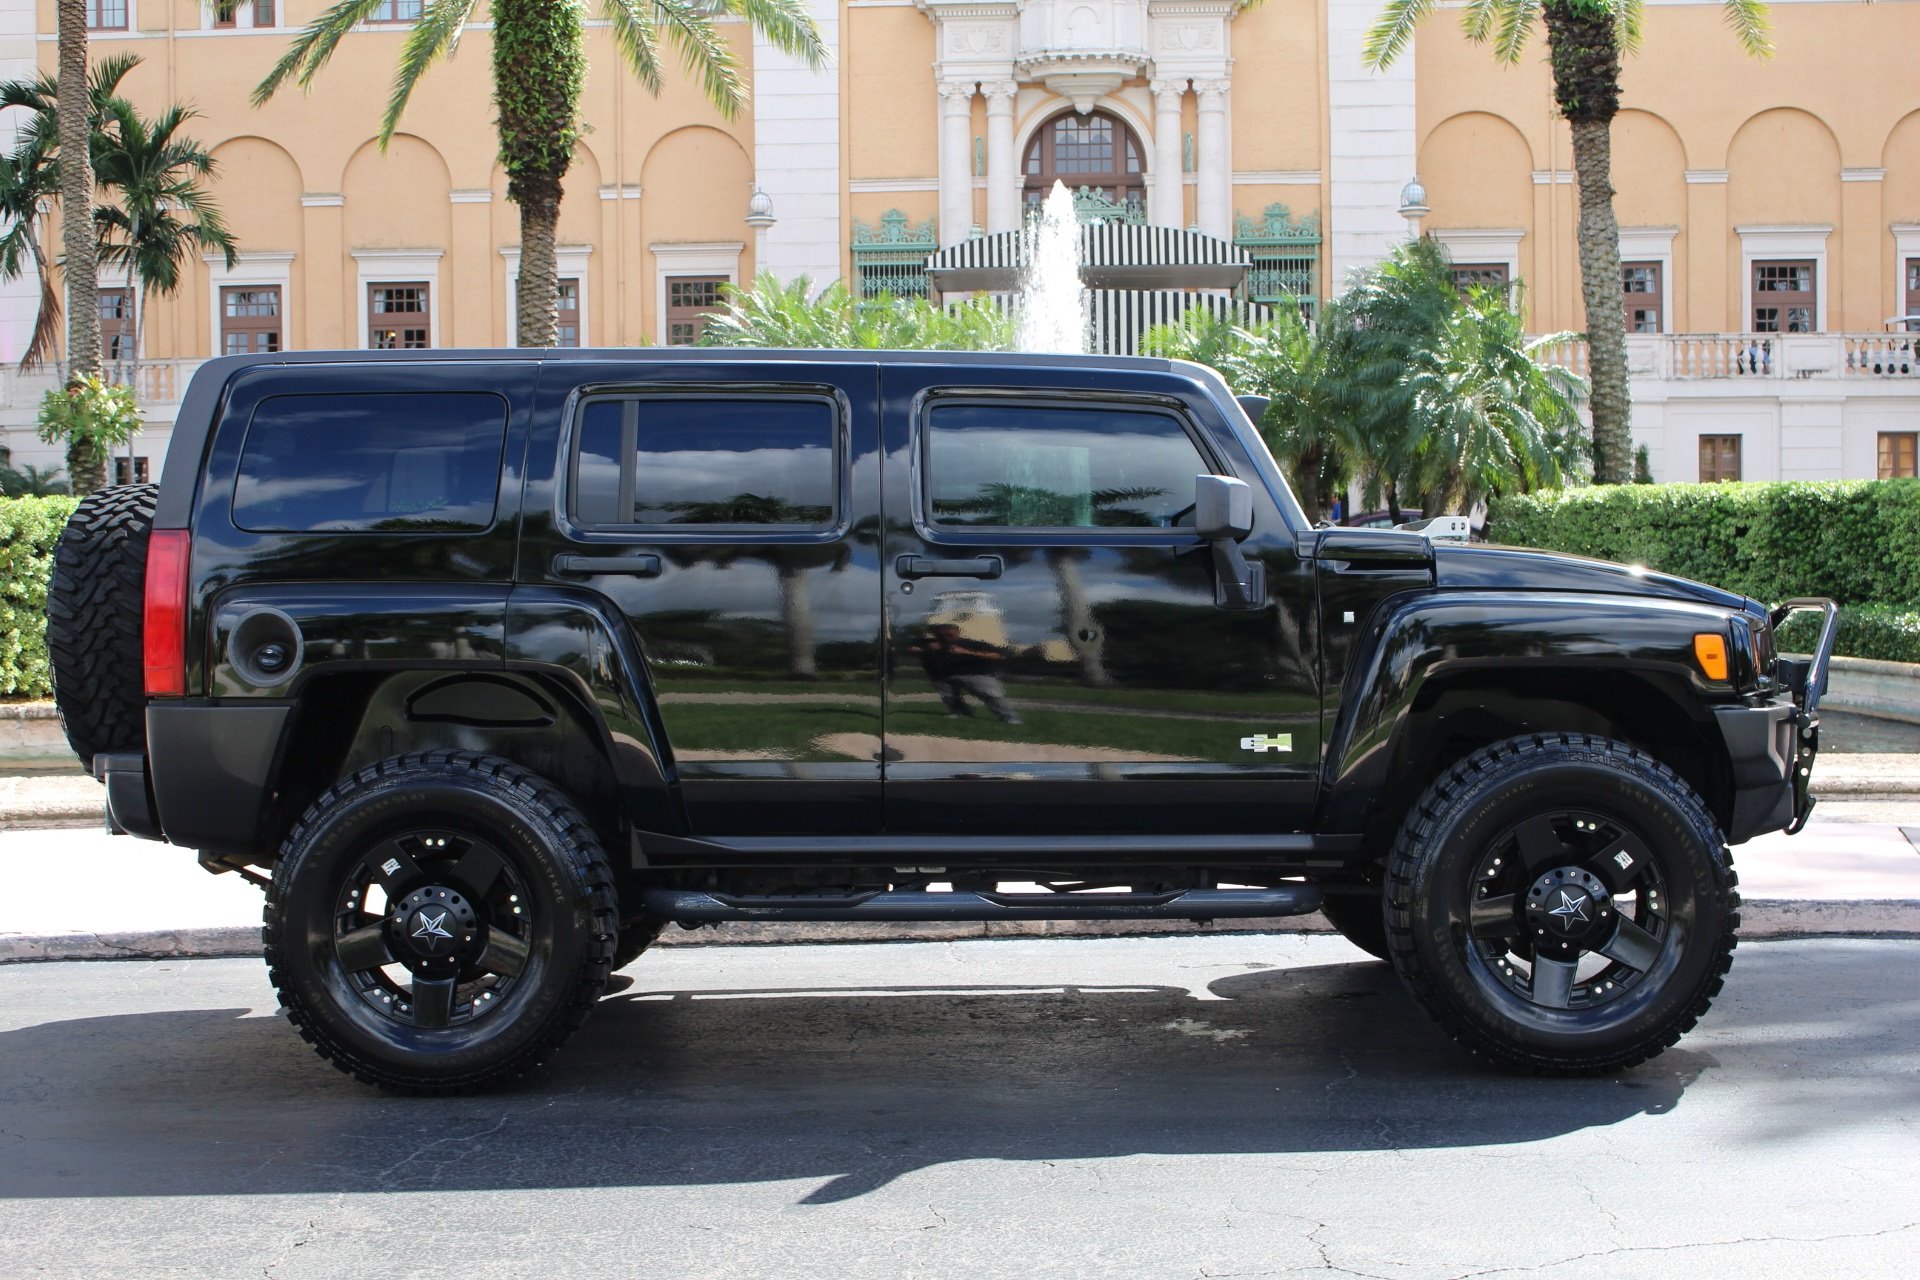 Used 2007 HUMMER H3 Adventure for sale Sold at The Gables Sports Cars in Miami FL 33146 1